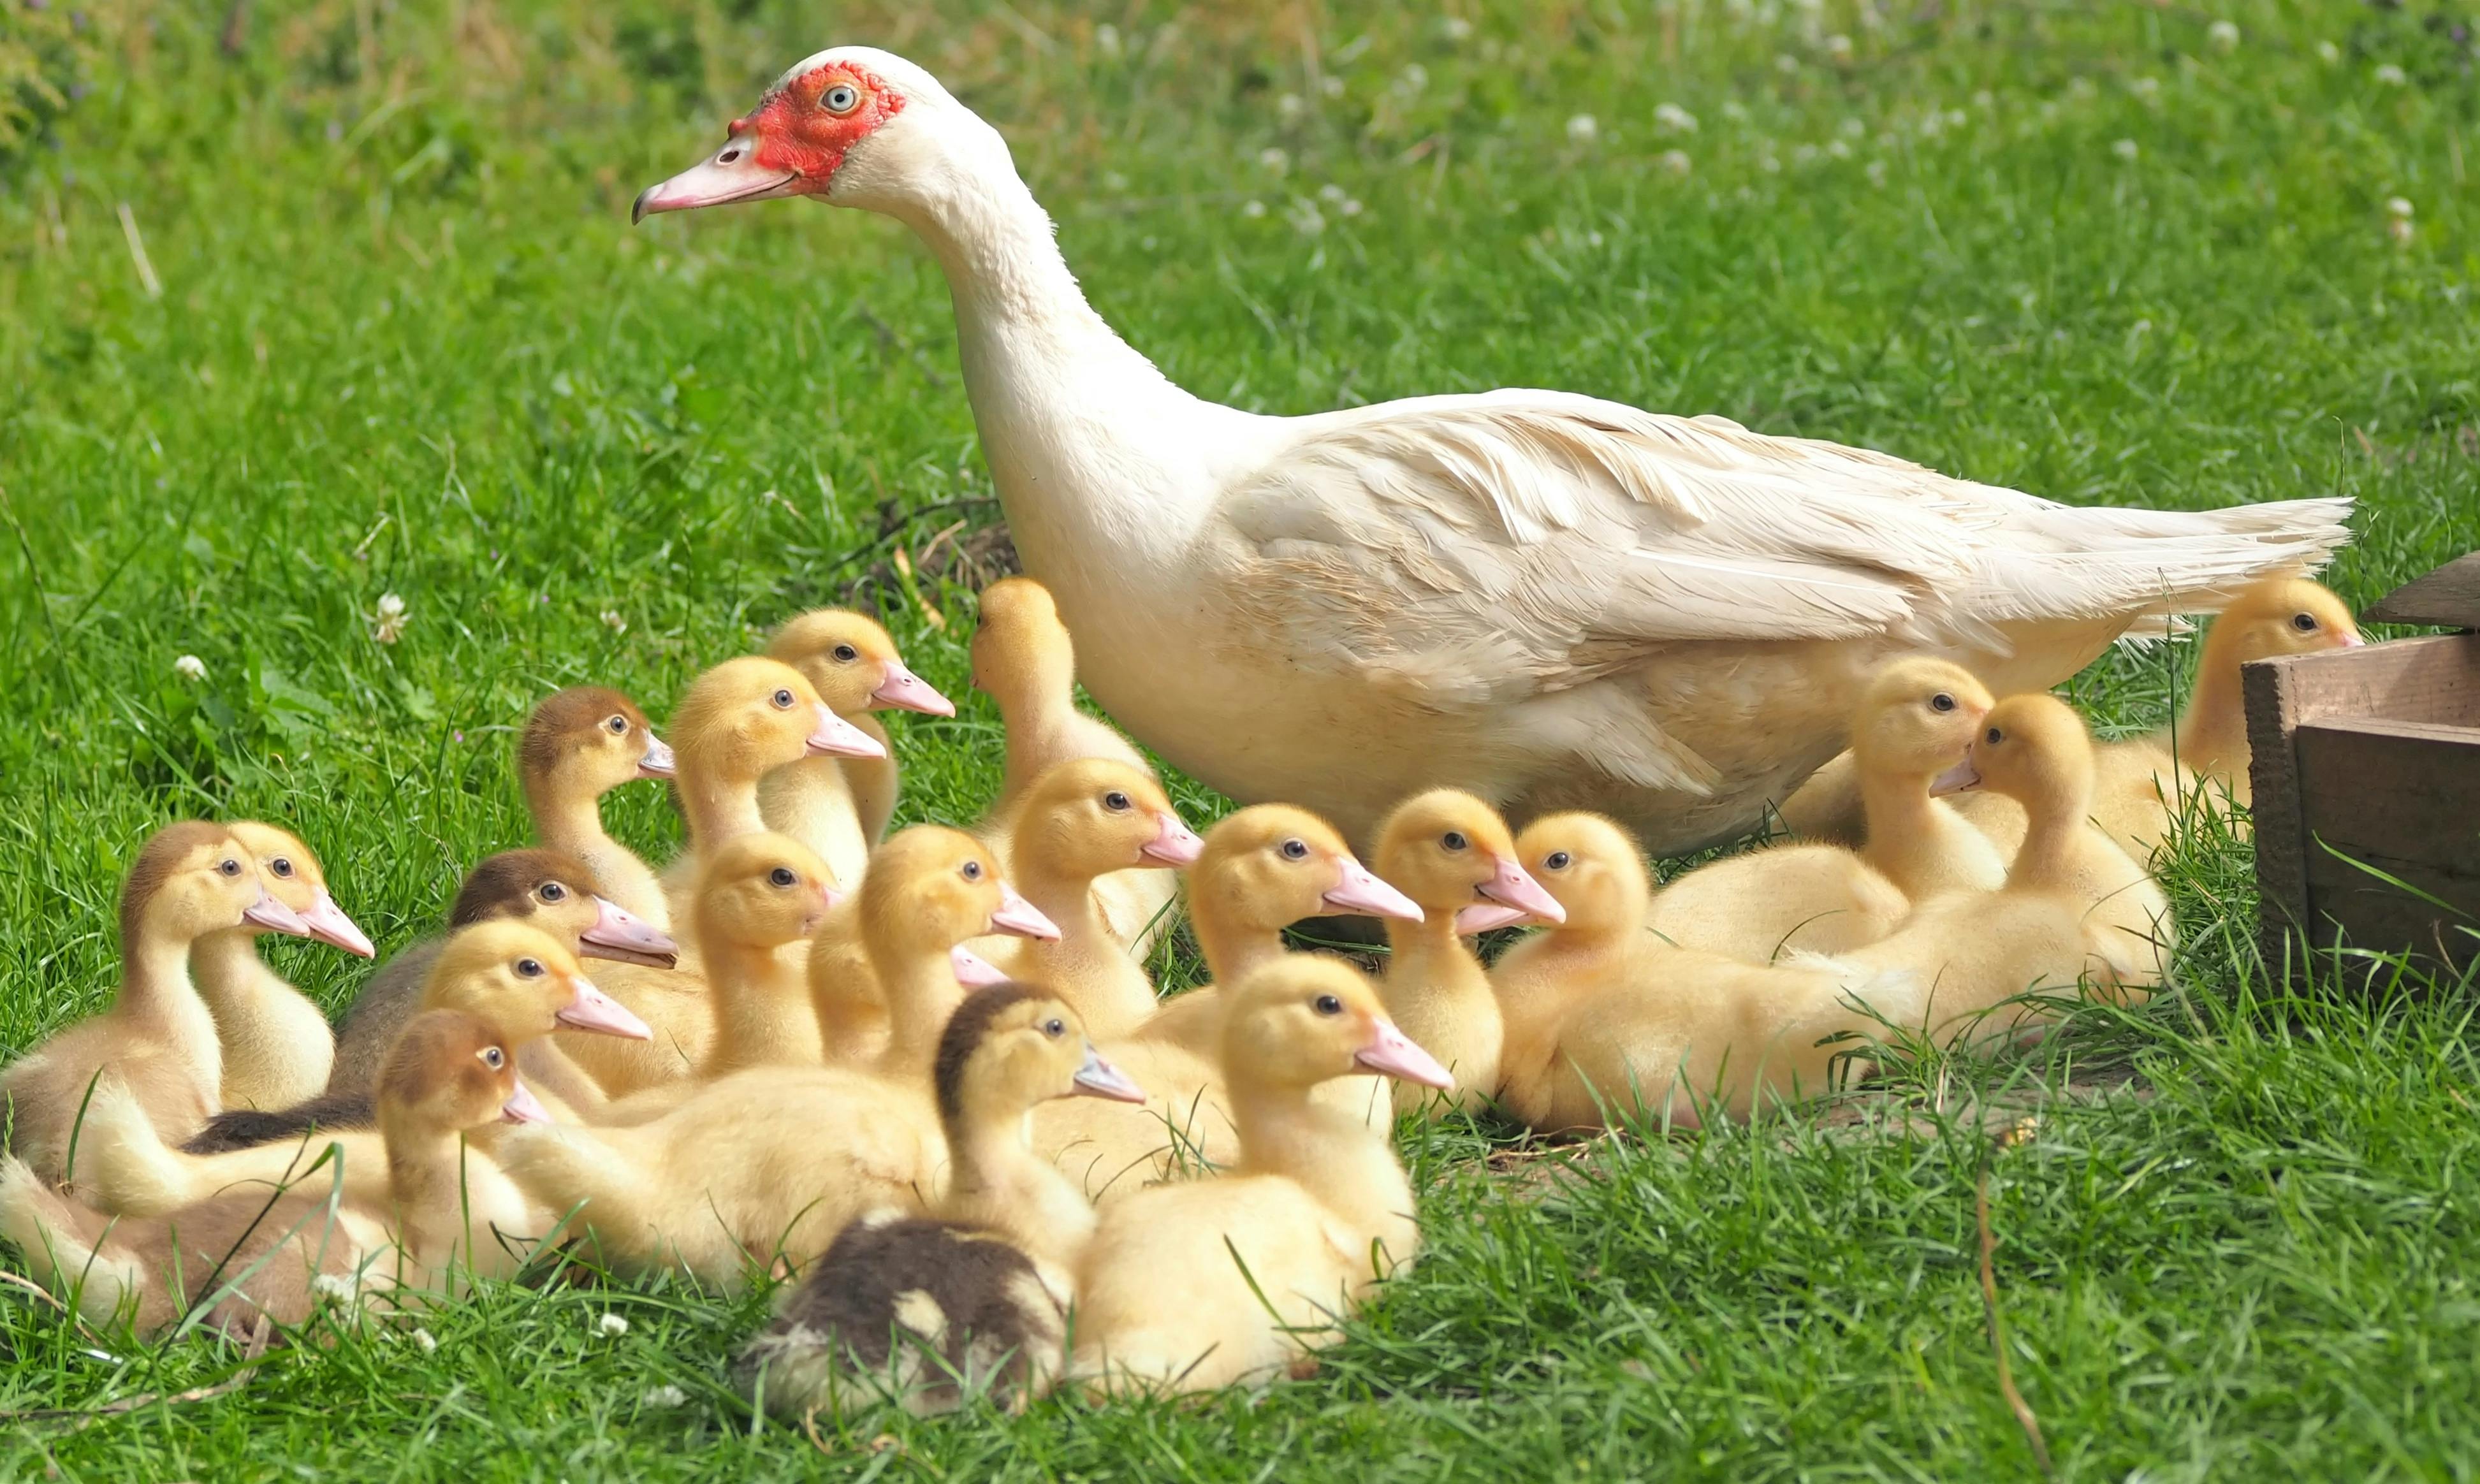 White Duck With 22 Ducklings in Green Grass Field · Free Stock Photo